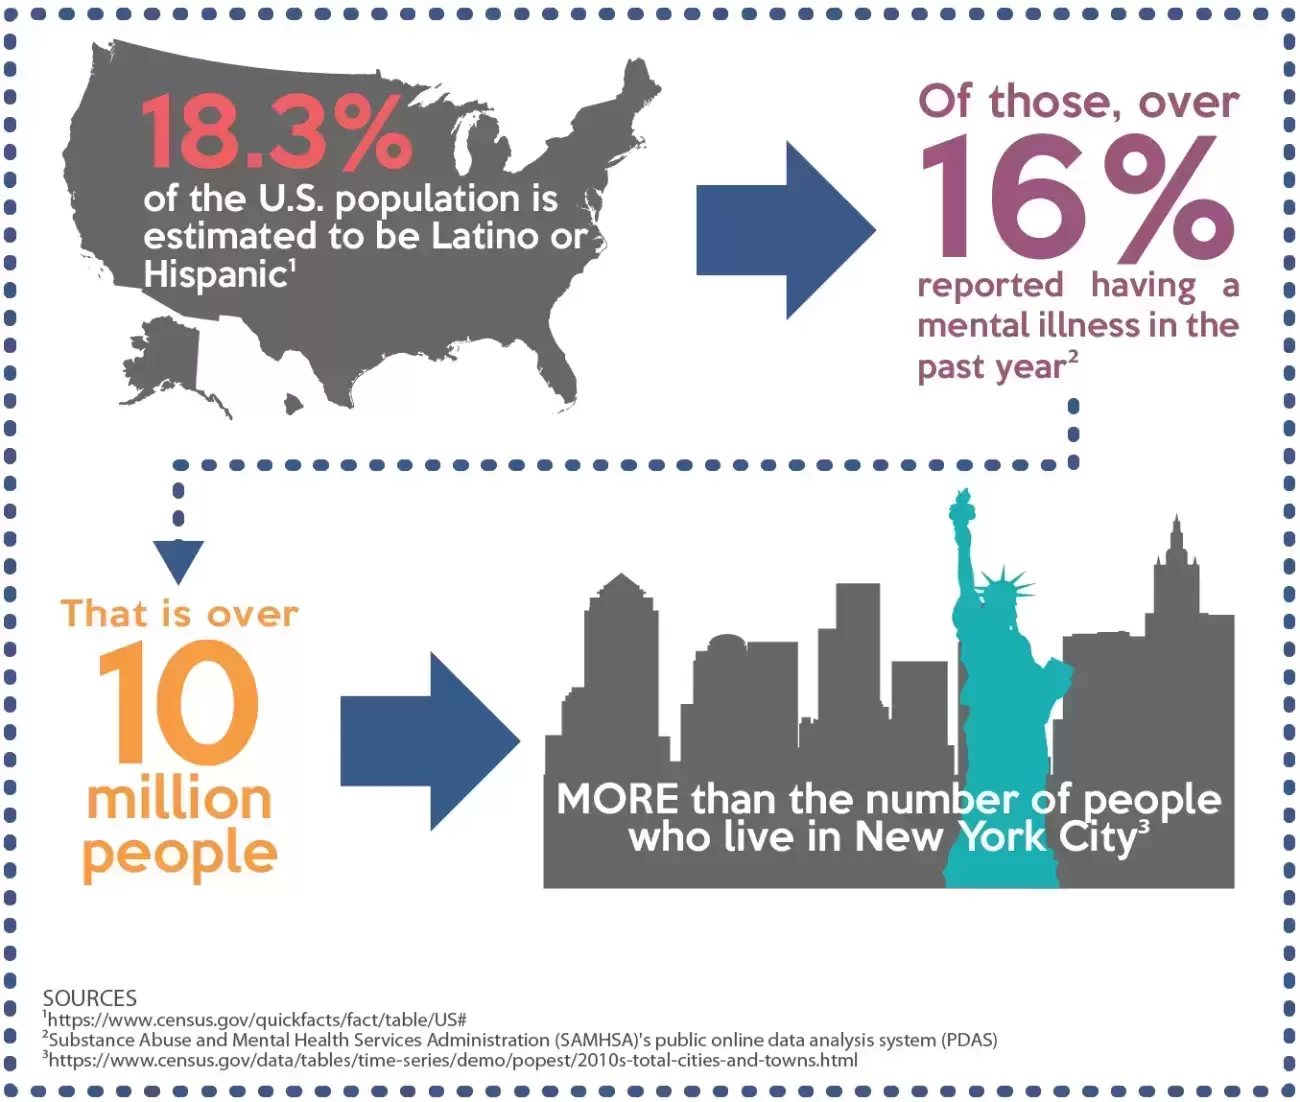 Infographic from Census stating that "18.3% of the U.S. population is estimated to be Latino or Hispanic, Of those, over 16% reported having a mental illness in the past year, that is over 10 million people, More than the number of people who live in New York City"